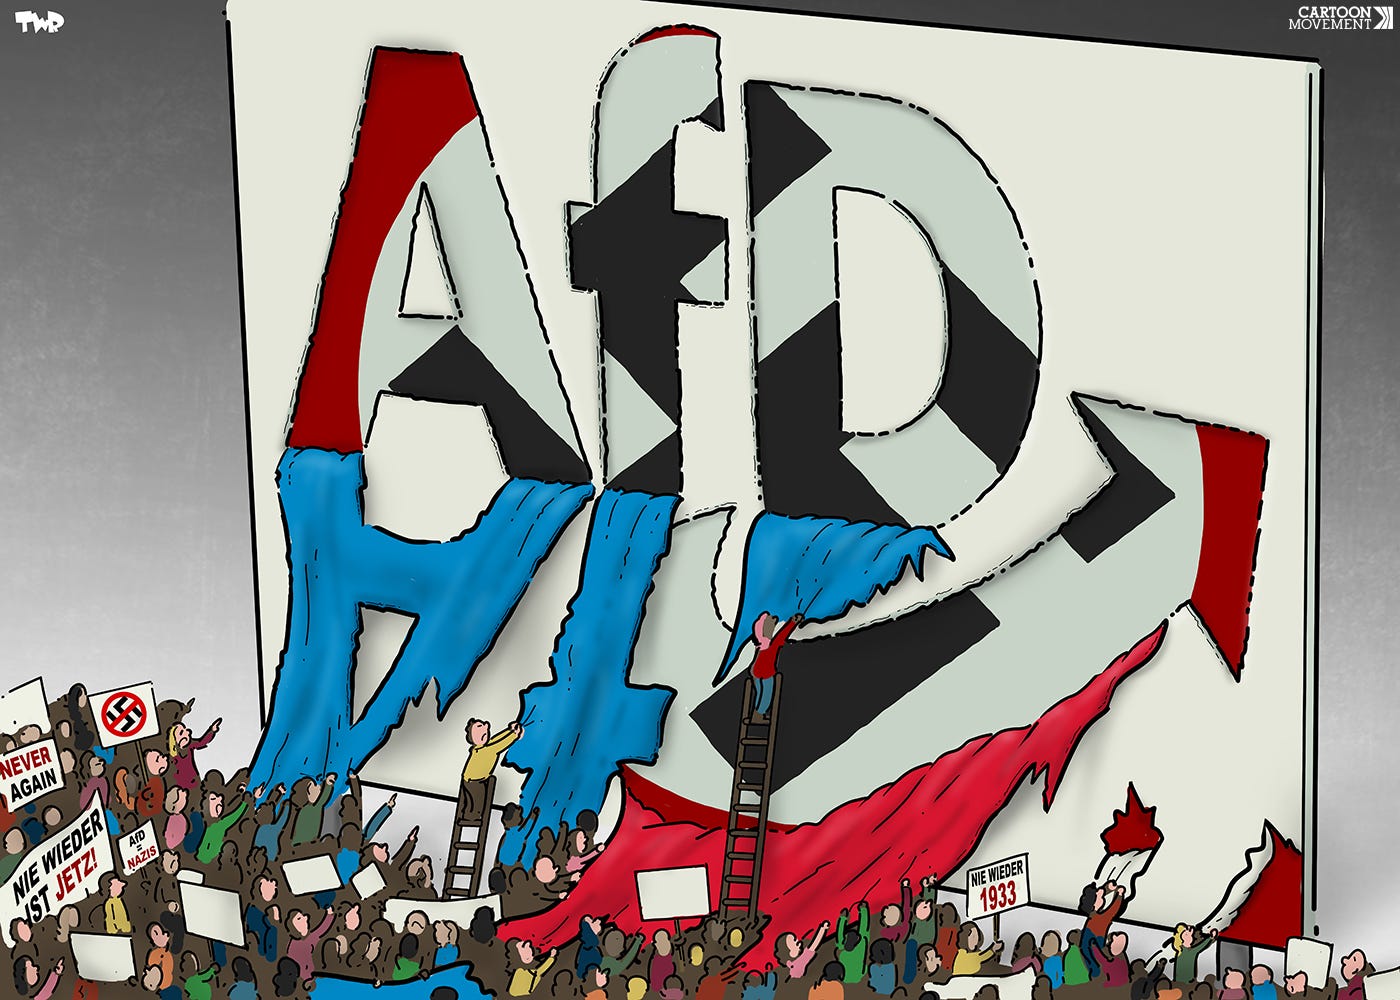 Cartoon showing a large billboard with the logo of the AfD. A large crowd of protesters is tearing off the logo, revealing a swastika underneath.